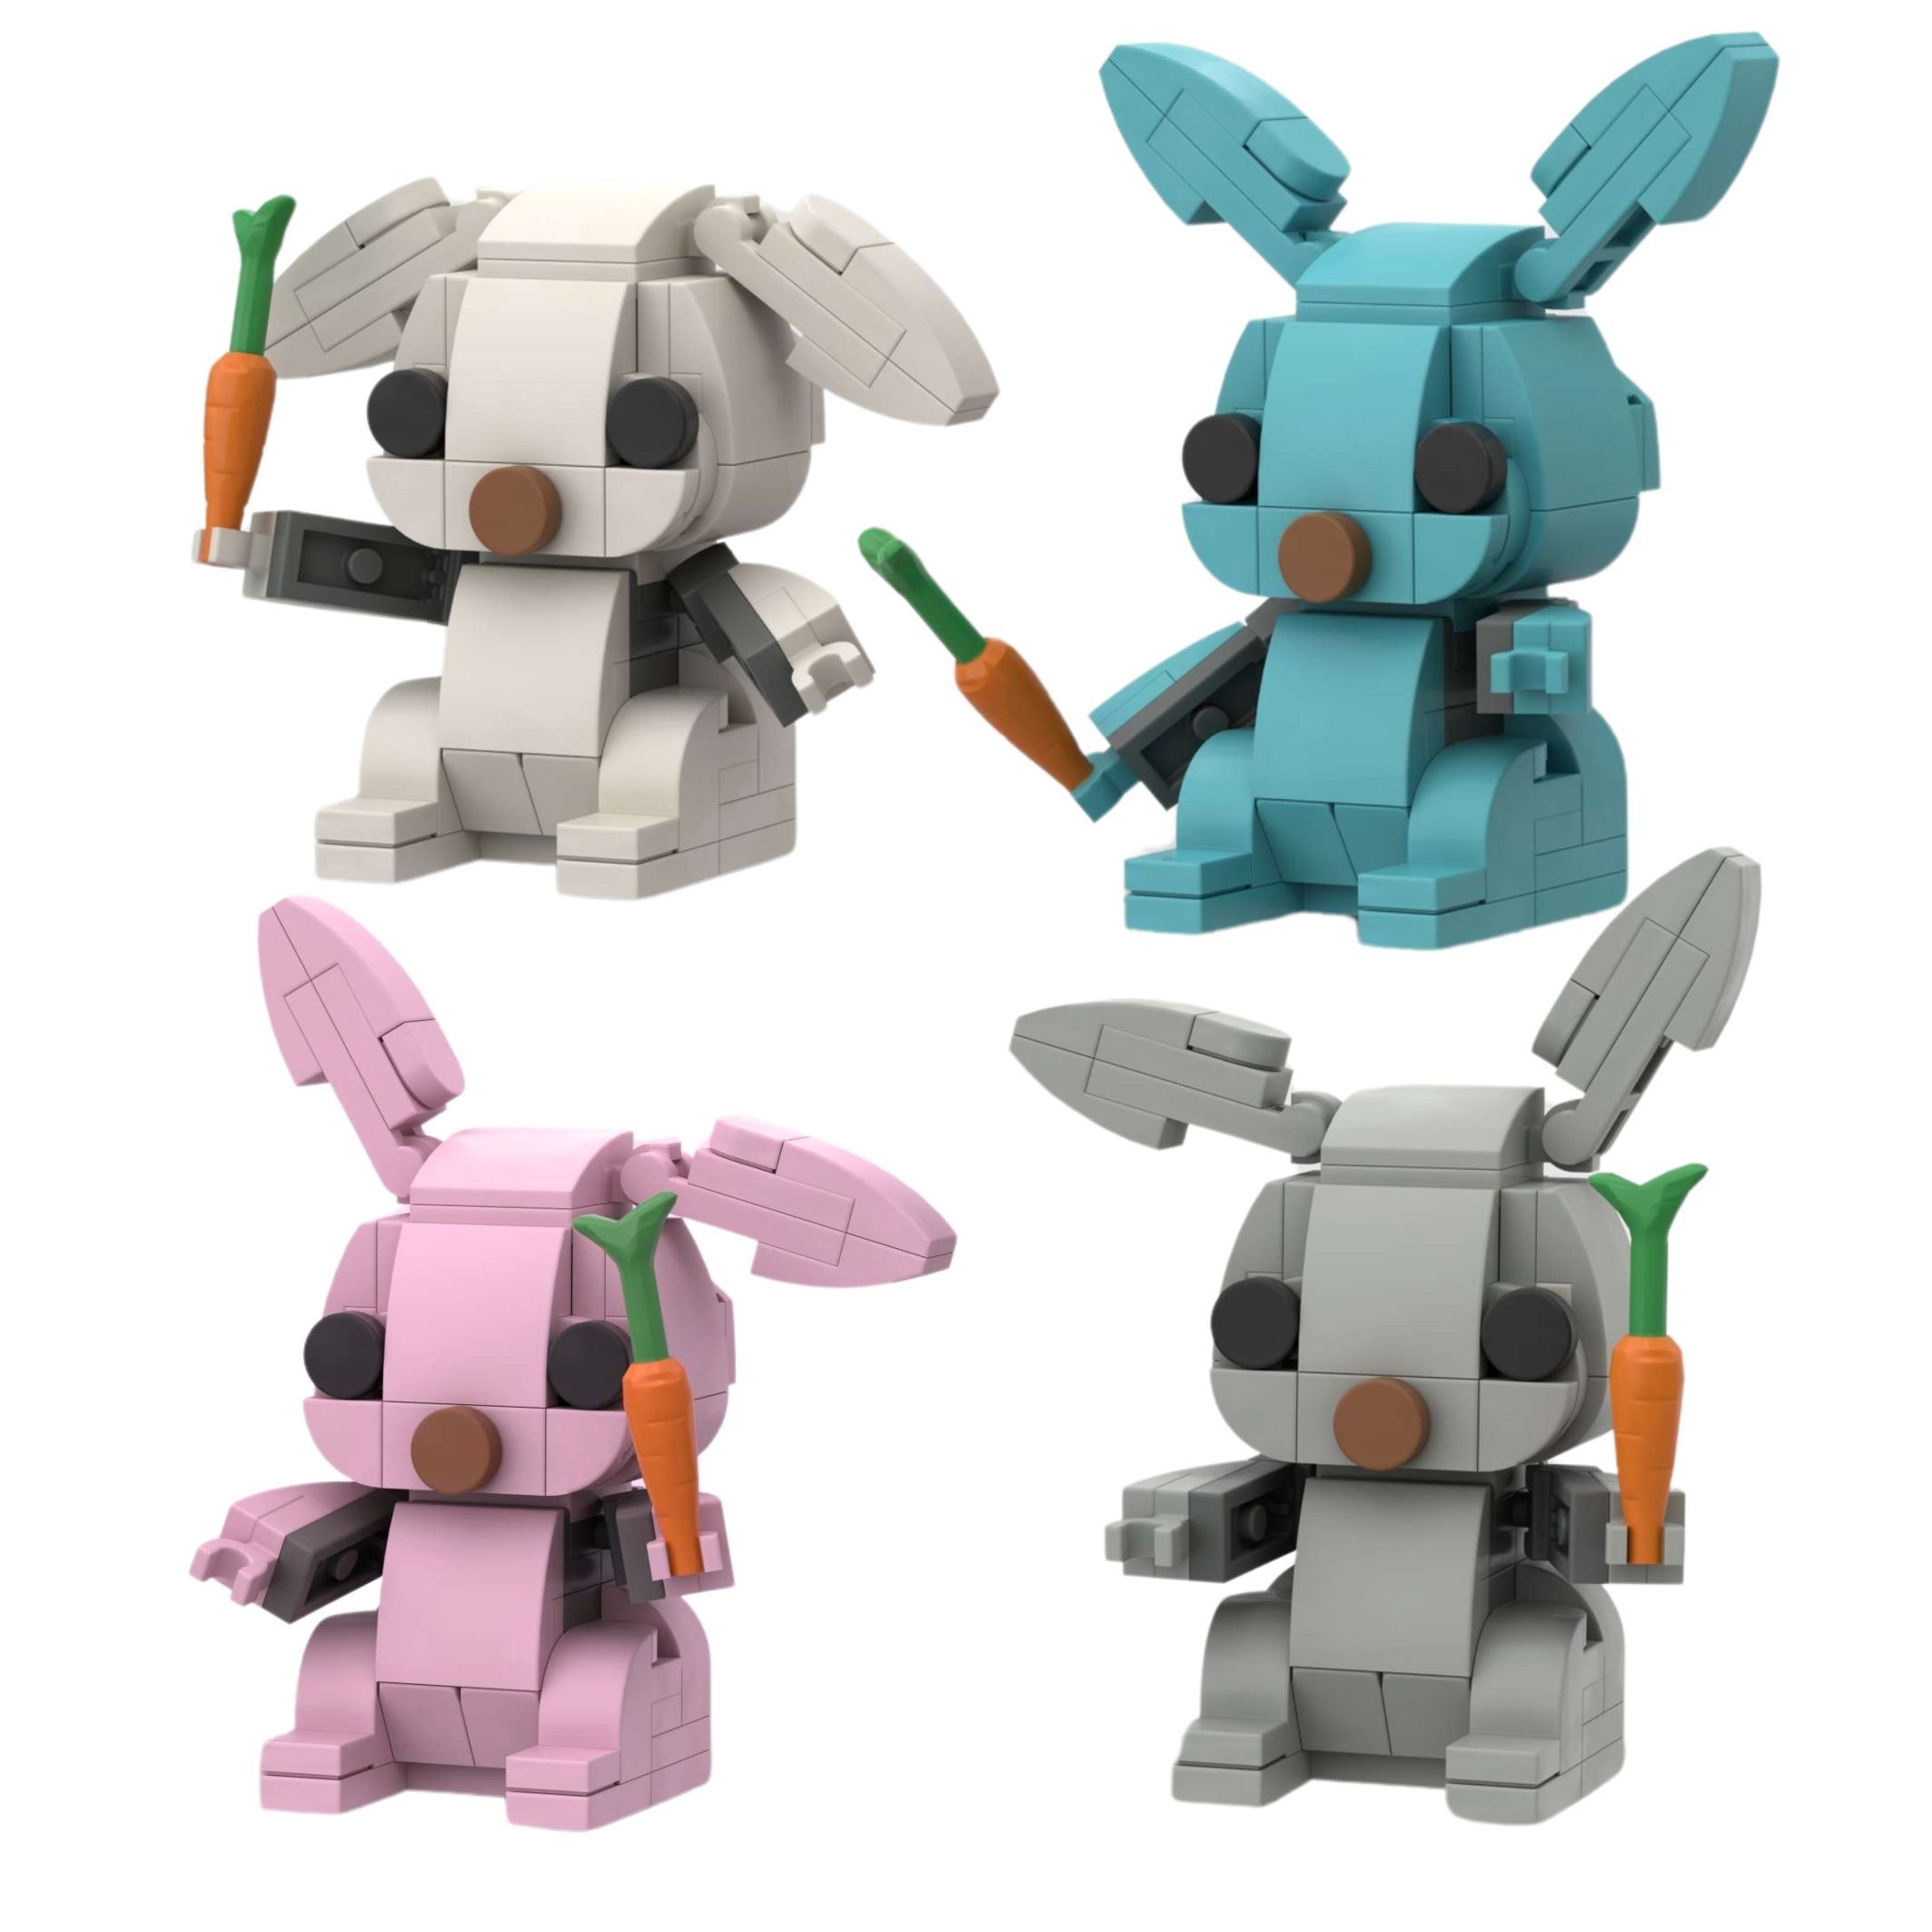 

Rabbit Building Blocks, Easter Bunny, Easter Basket Stuffed Bunny, Easter Ornament, Animal Building Blocks, Colorful Rabbit Toys, Easter Gifts, Easter Accessories, Educational Toys, Birthday Gift